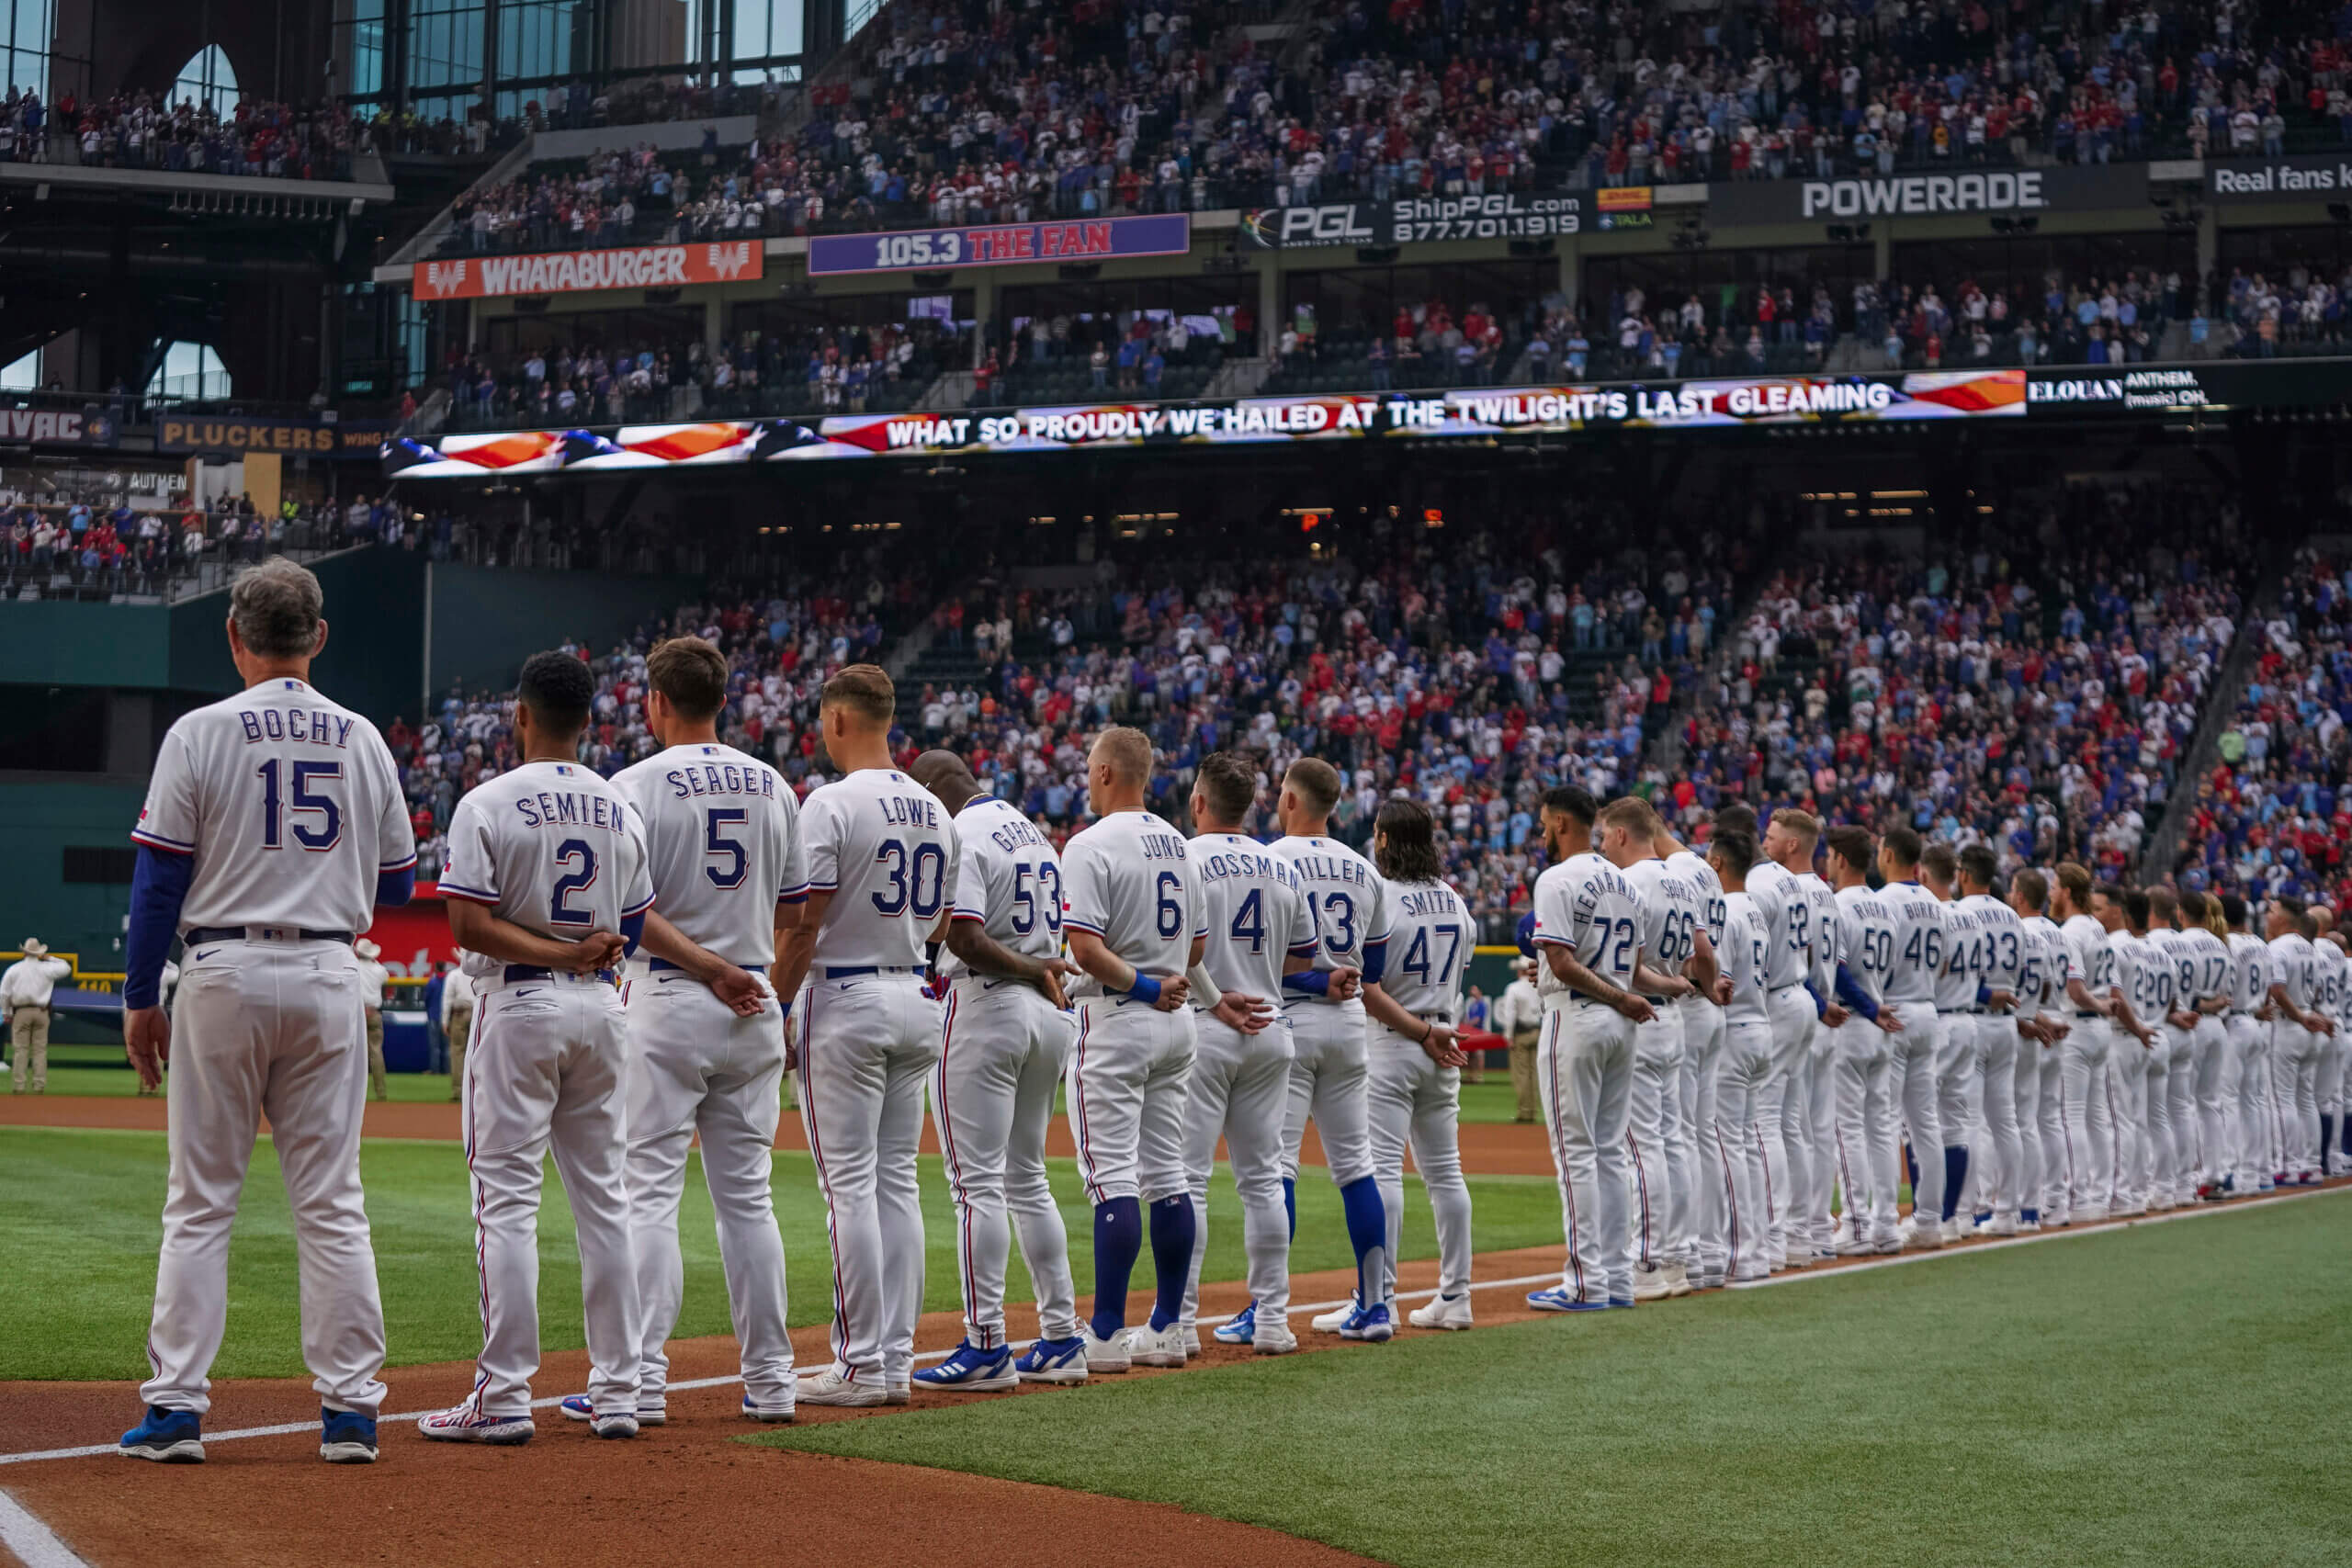 Why are the Texas Rangers the only MLB team without a Pride Night? pic